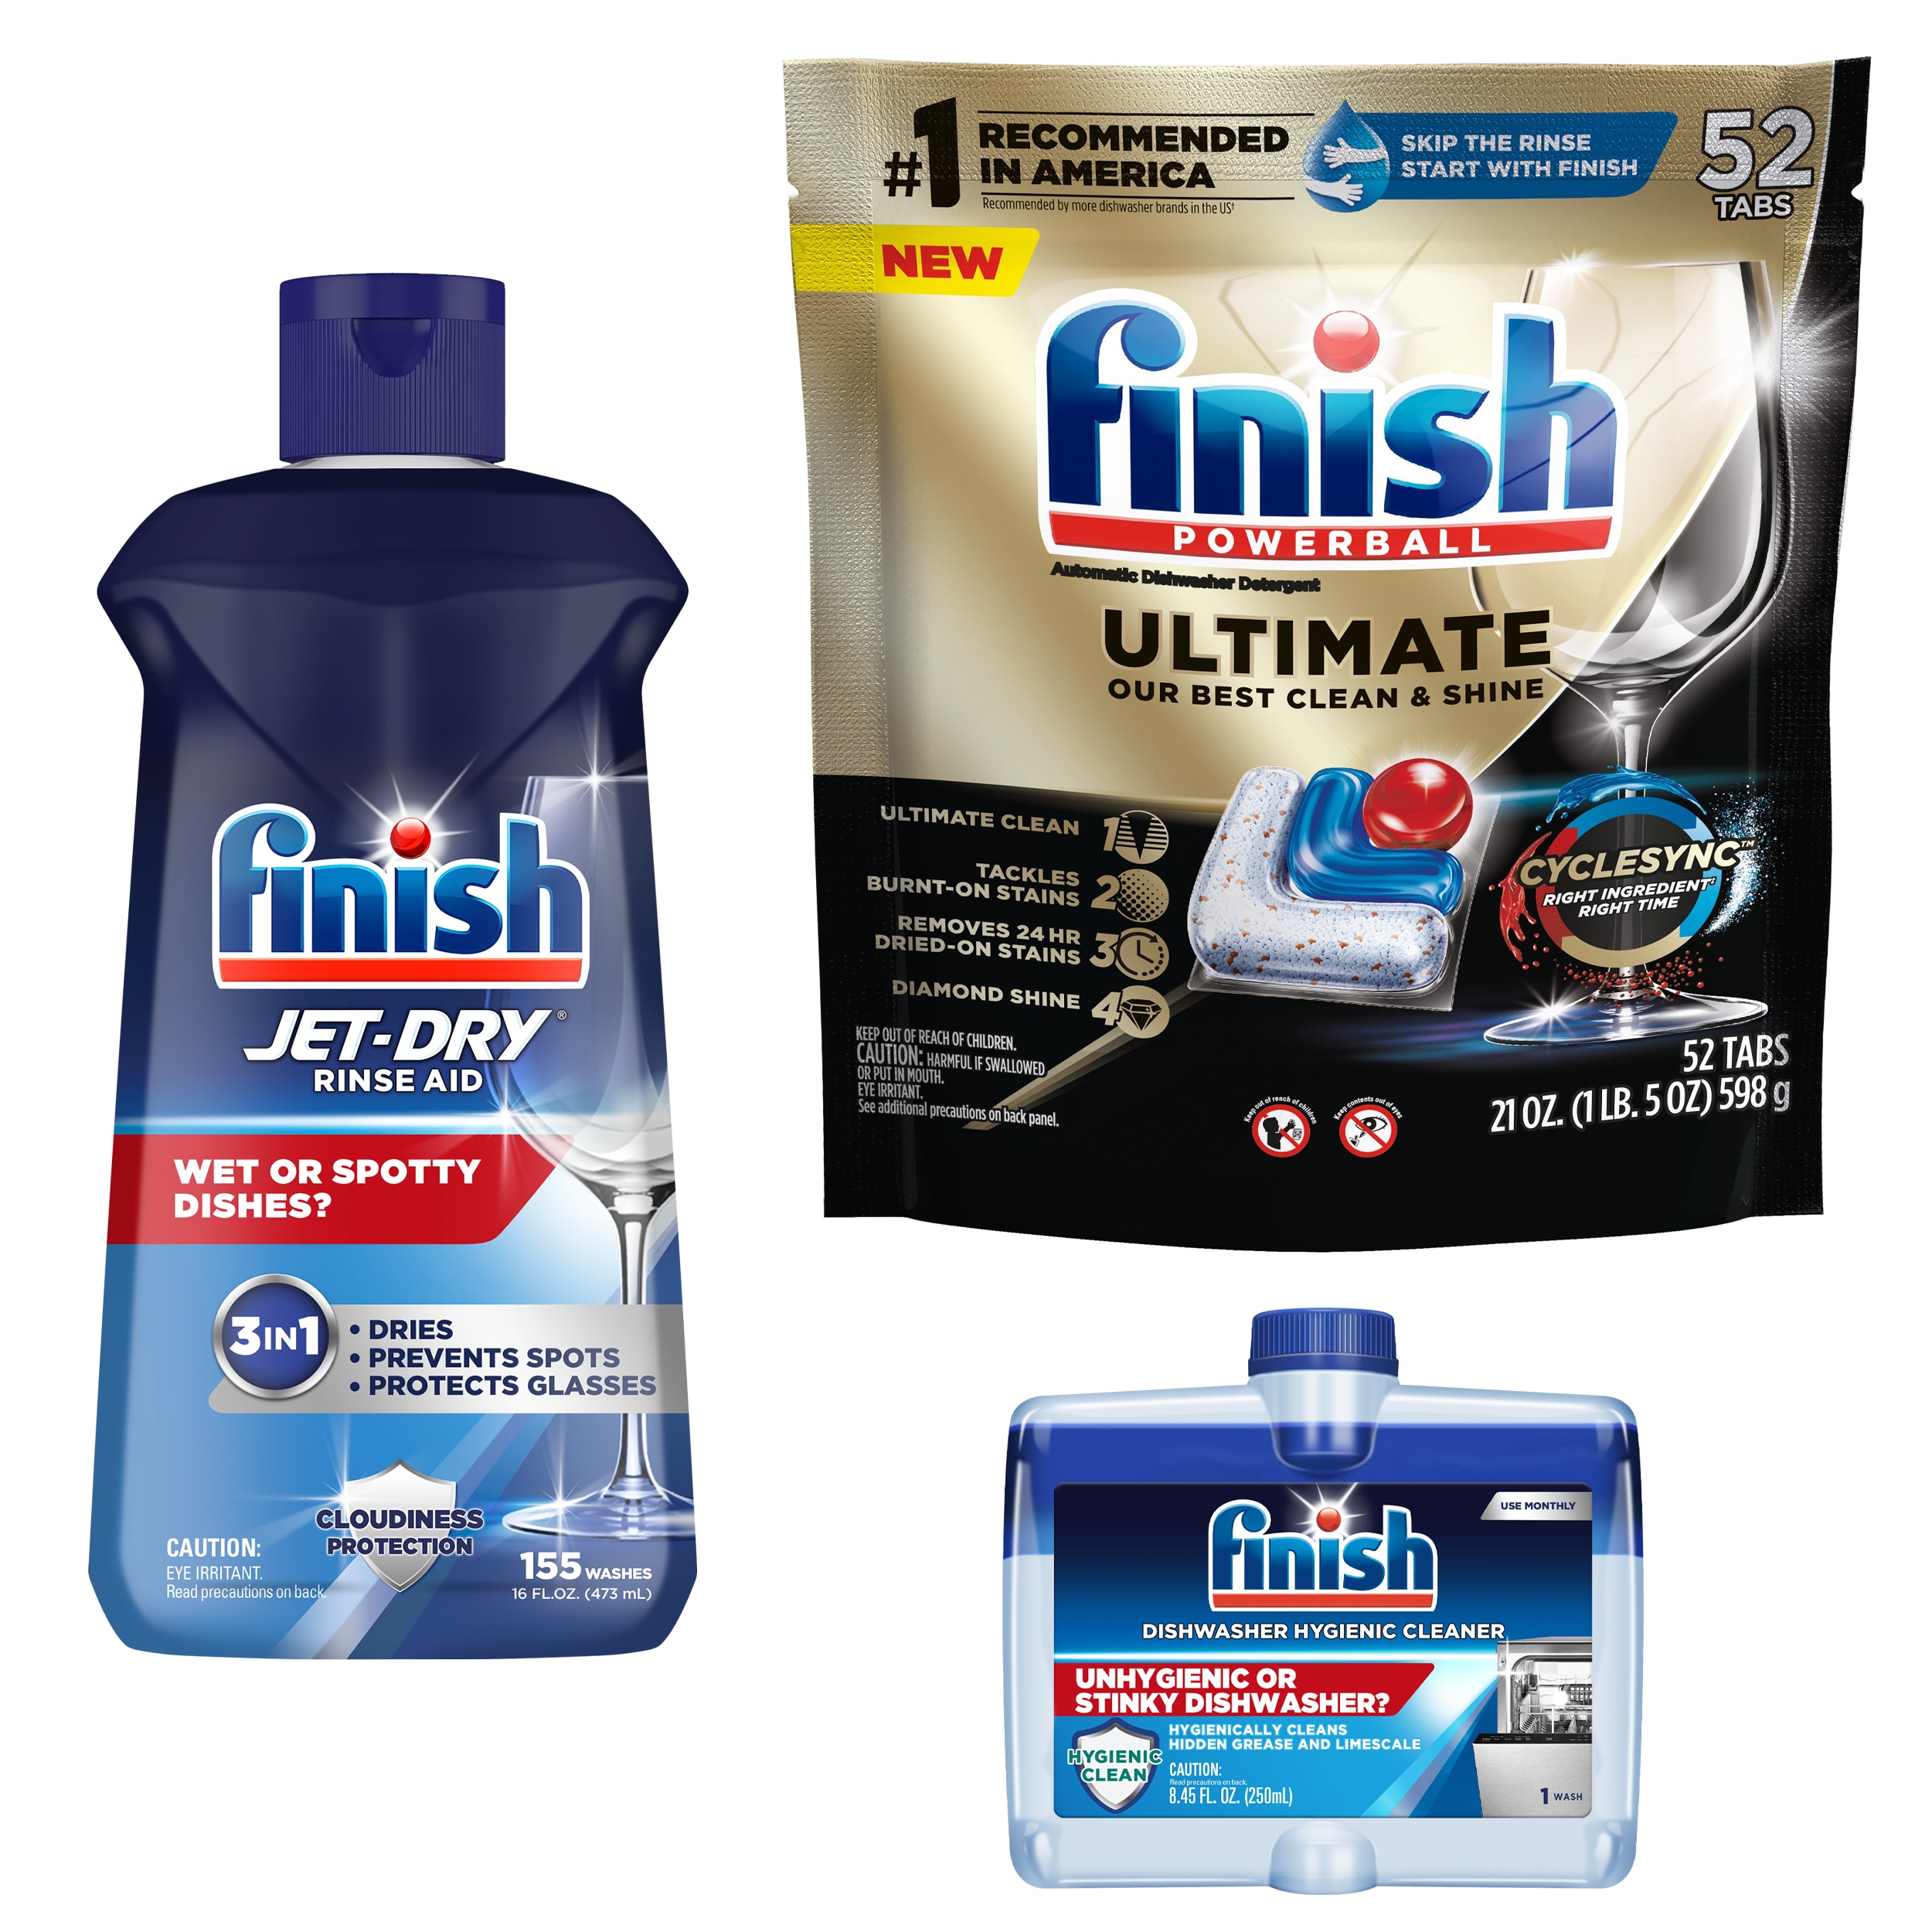 Finish Jet-Dry Hardwater Rinse Aid, 8.45 fl oz (250 mL) Ingredients and  Reviews